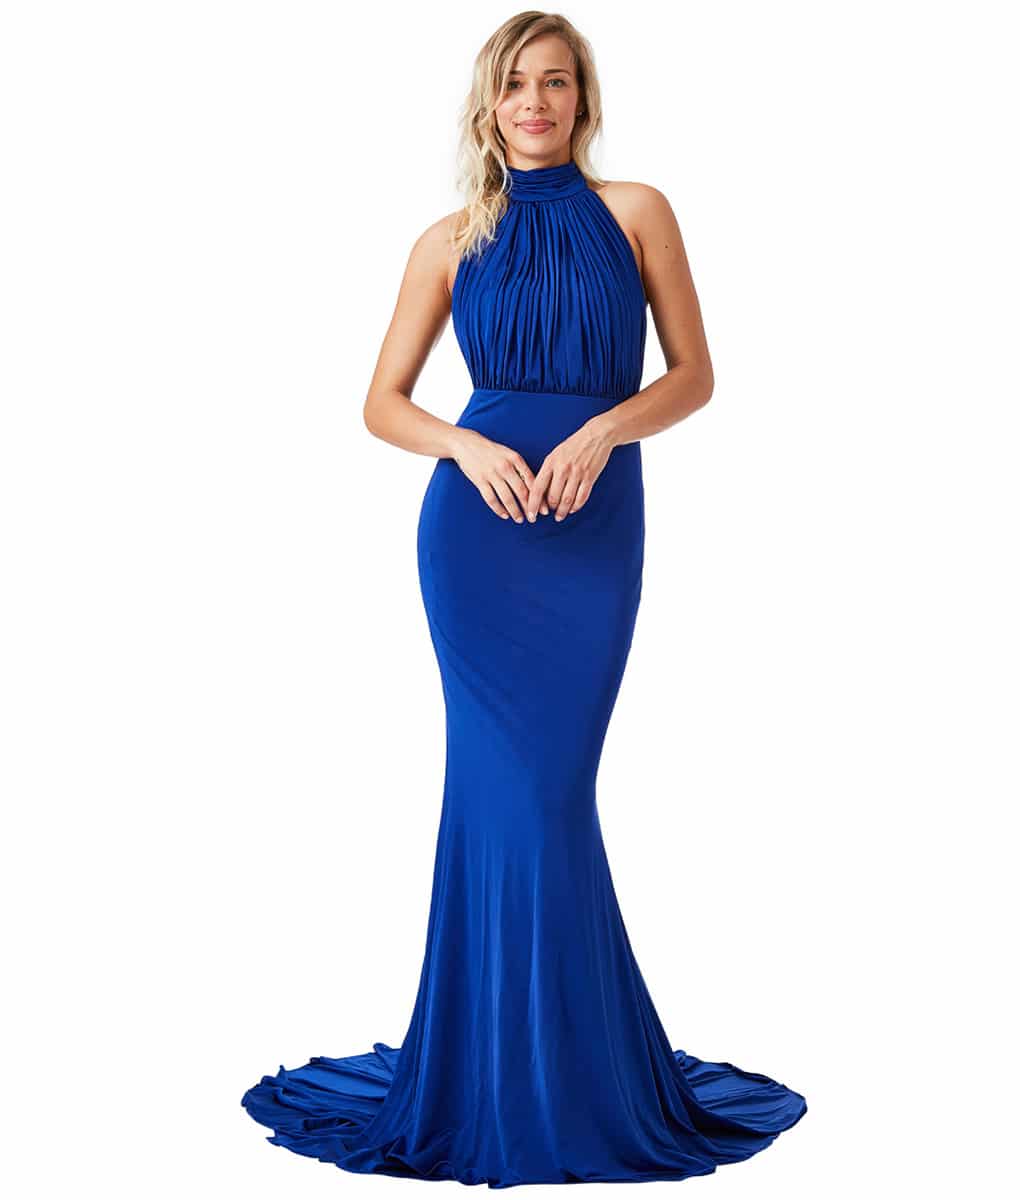 City Goddess – Blue High-Neck Backless Gown - Alila